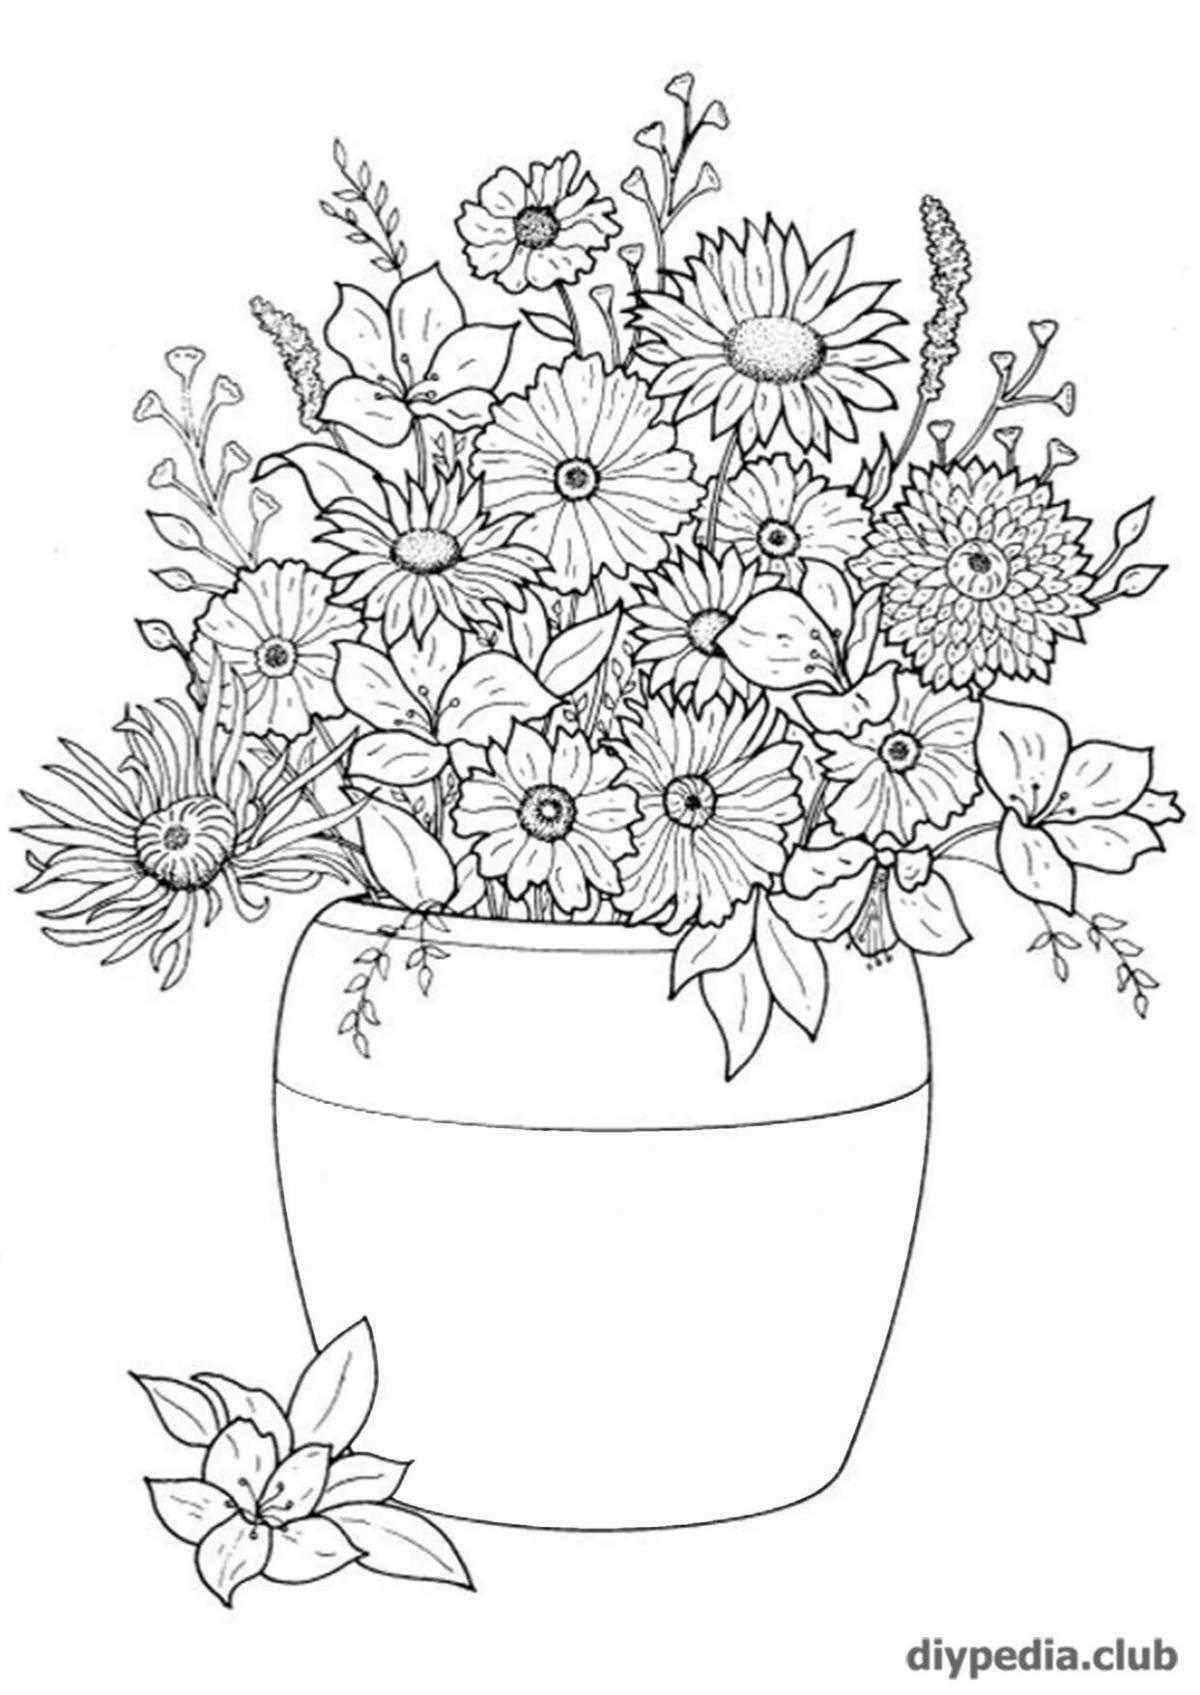 Coloring flower bouquet in a vase